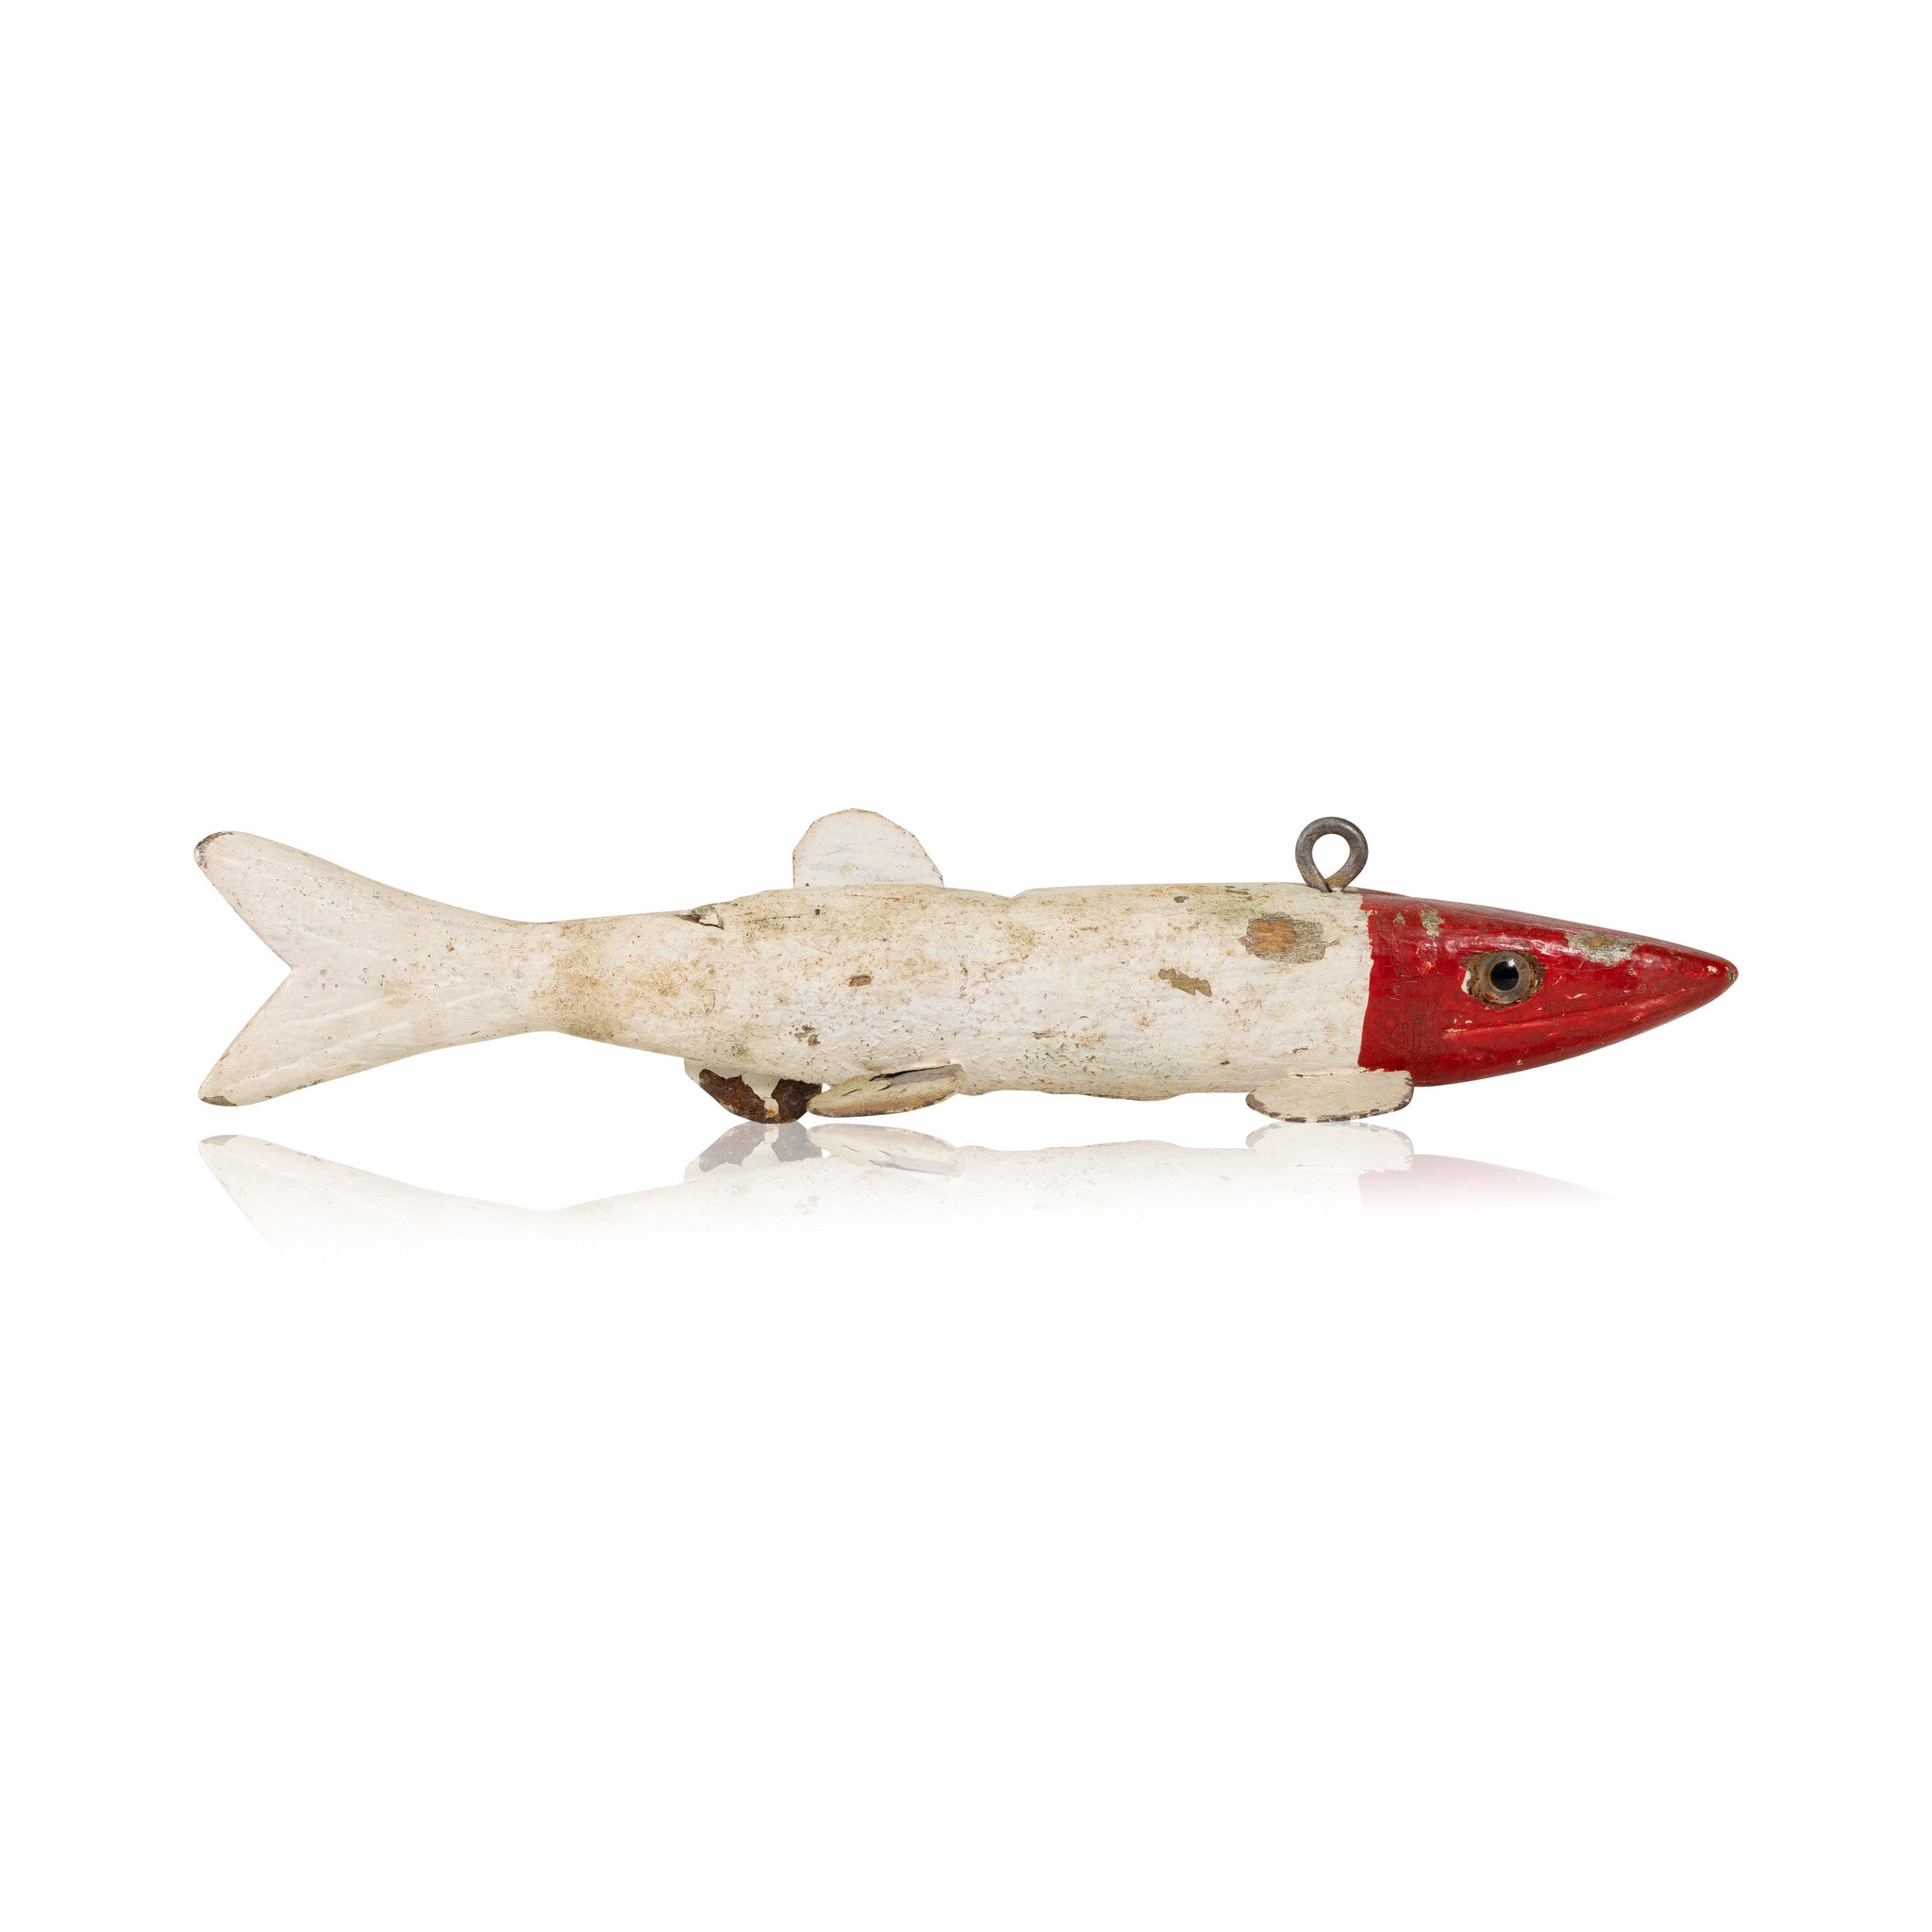 Red and White Spearfish Decoy, Sporting Goods, Fishing, Decoy